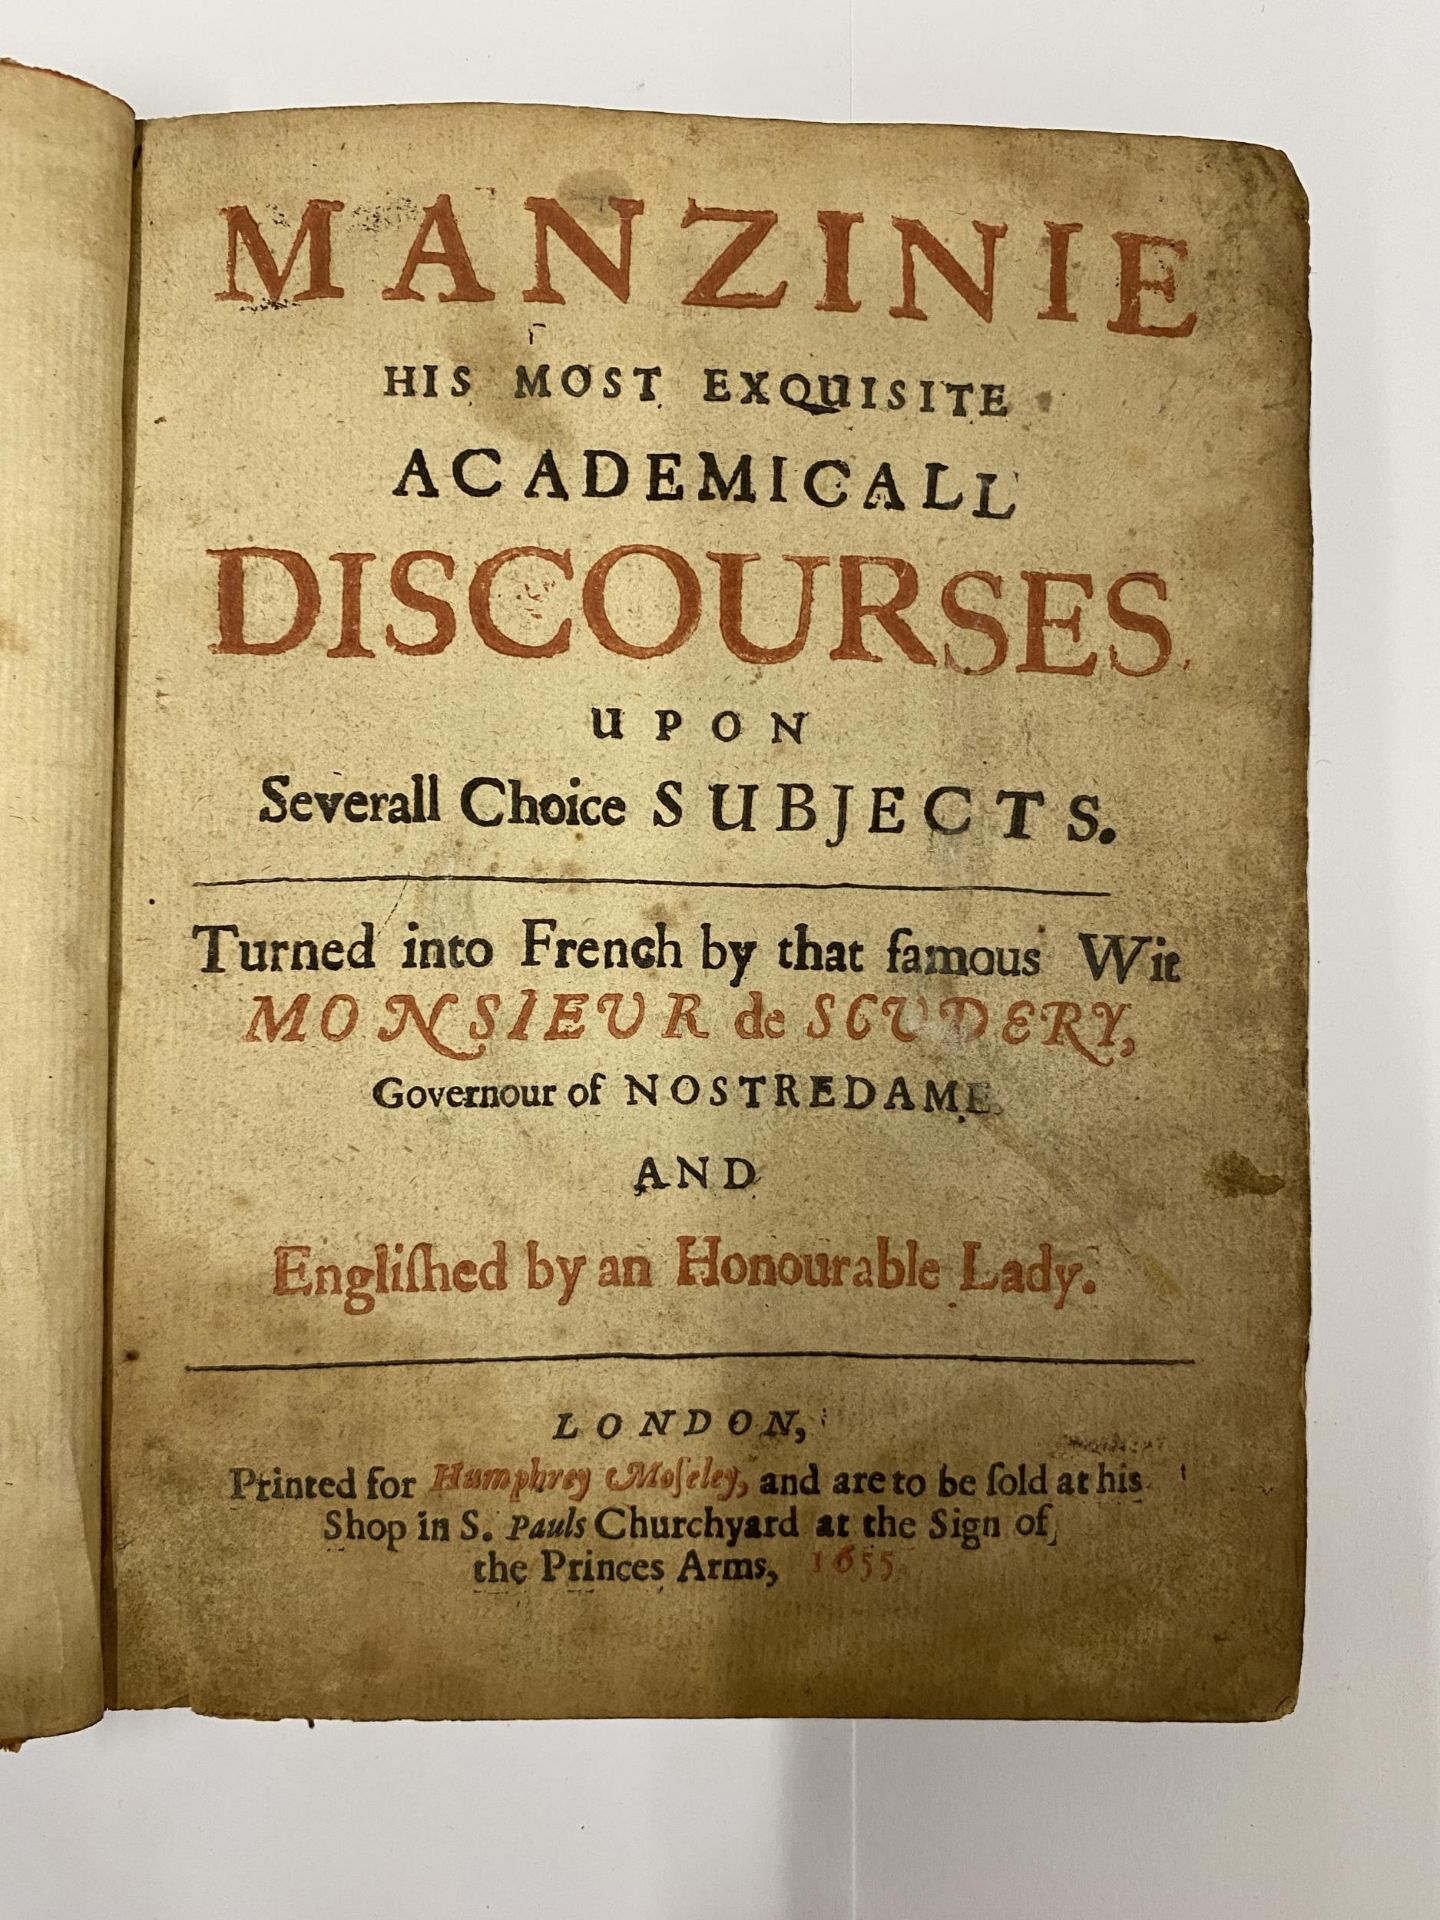 A RARE AND EARLY 17TH CENTURY BOOK - 'MANZINE HIS MOST EXQUISITE ACADEMICAL DISCOURSES UPON